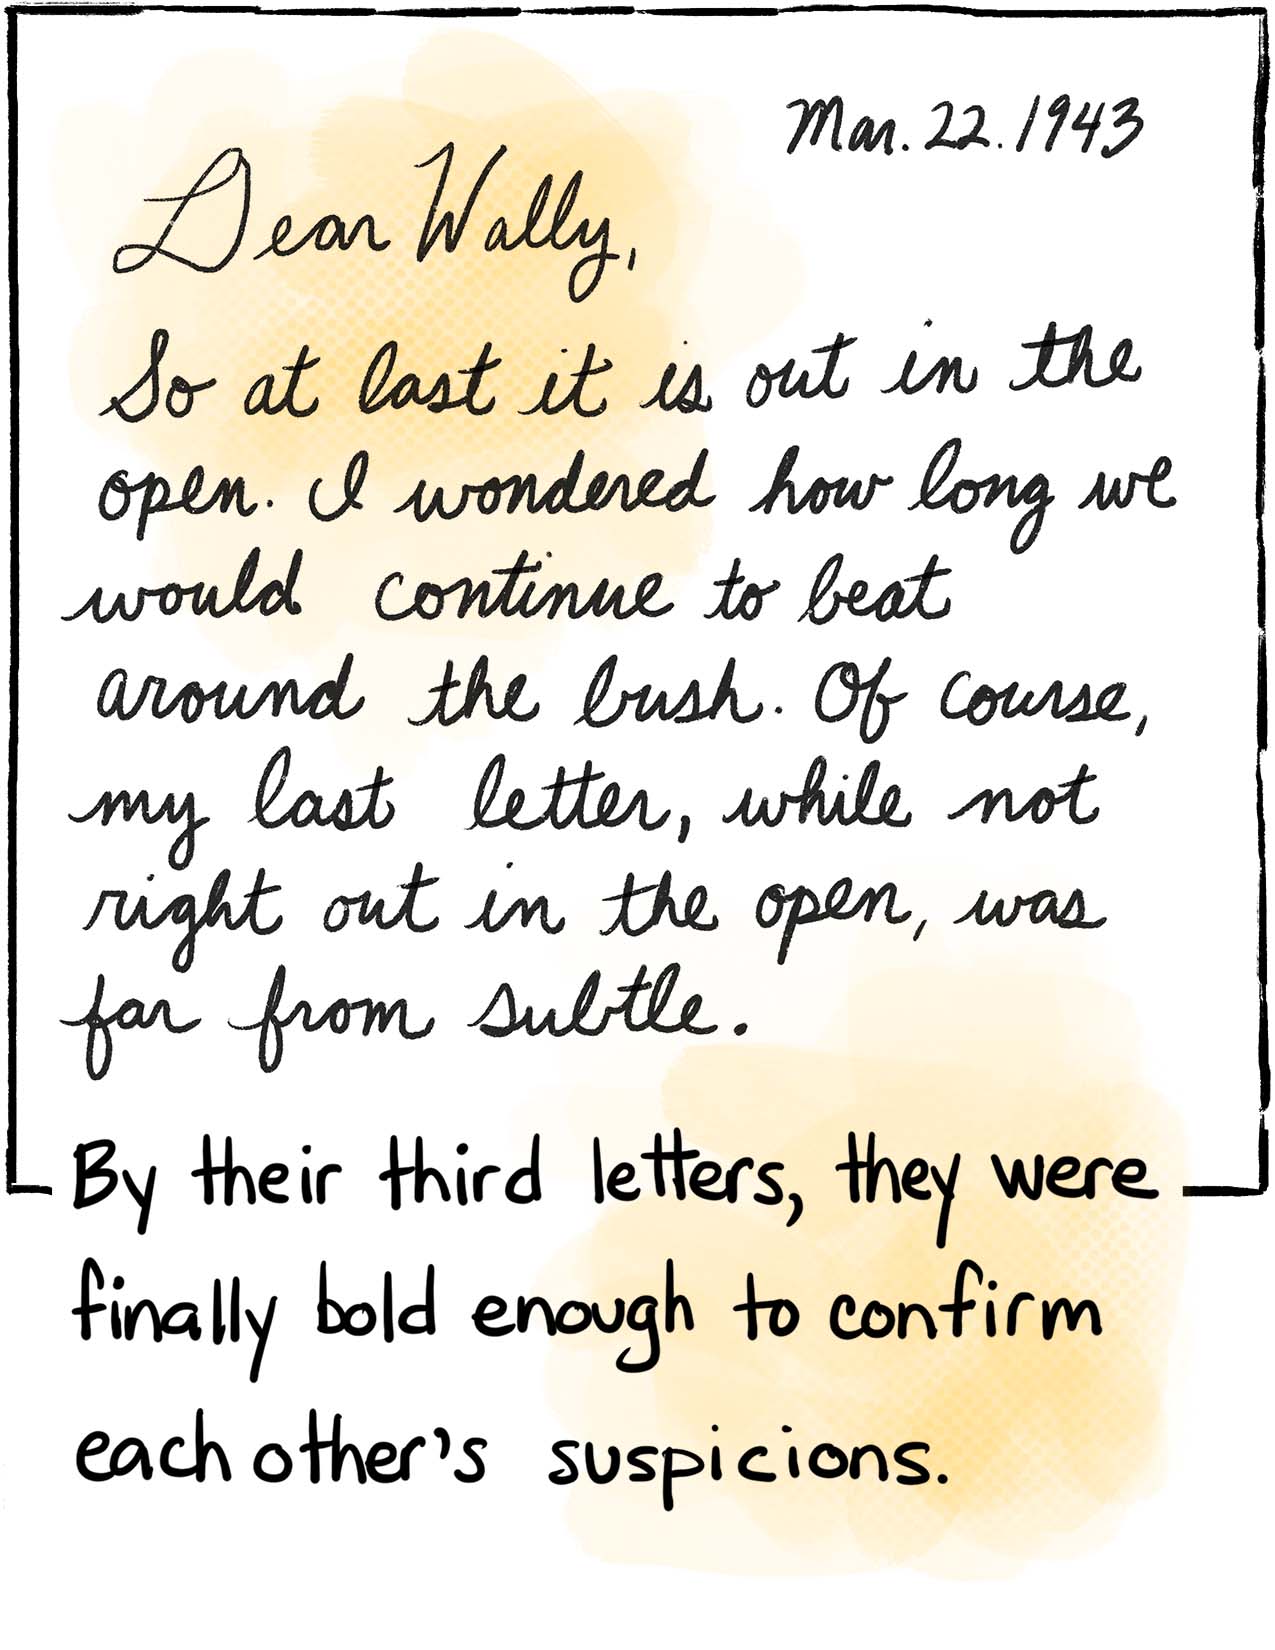 Image: Dear Wally, March 22, 1943 “So at last it is out in the open. I wondered how long we would continue to beat around the bush. Of course, my last letter, while not right out in the open, was far from subtle. This is somewhat of a new experience for me, and I have enjoyed it immensely, from your first letter. Hope that’ll last.” Text: By their third letters, they were finally bold enough to confirm each other’s suspicions.